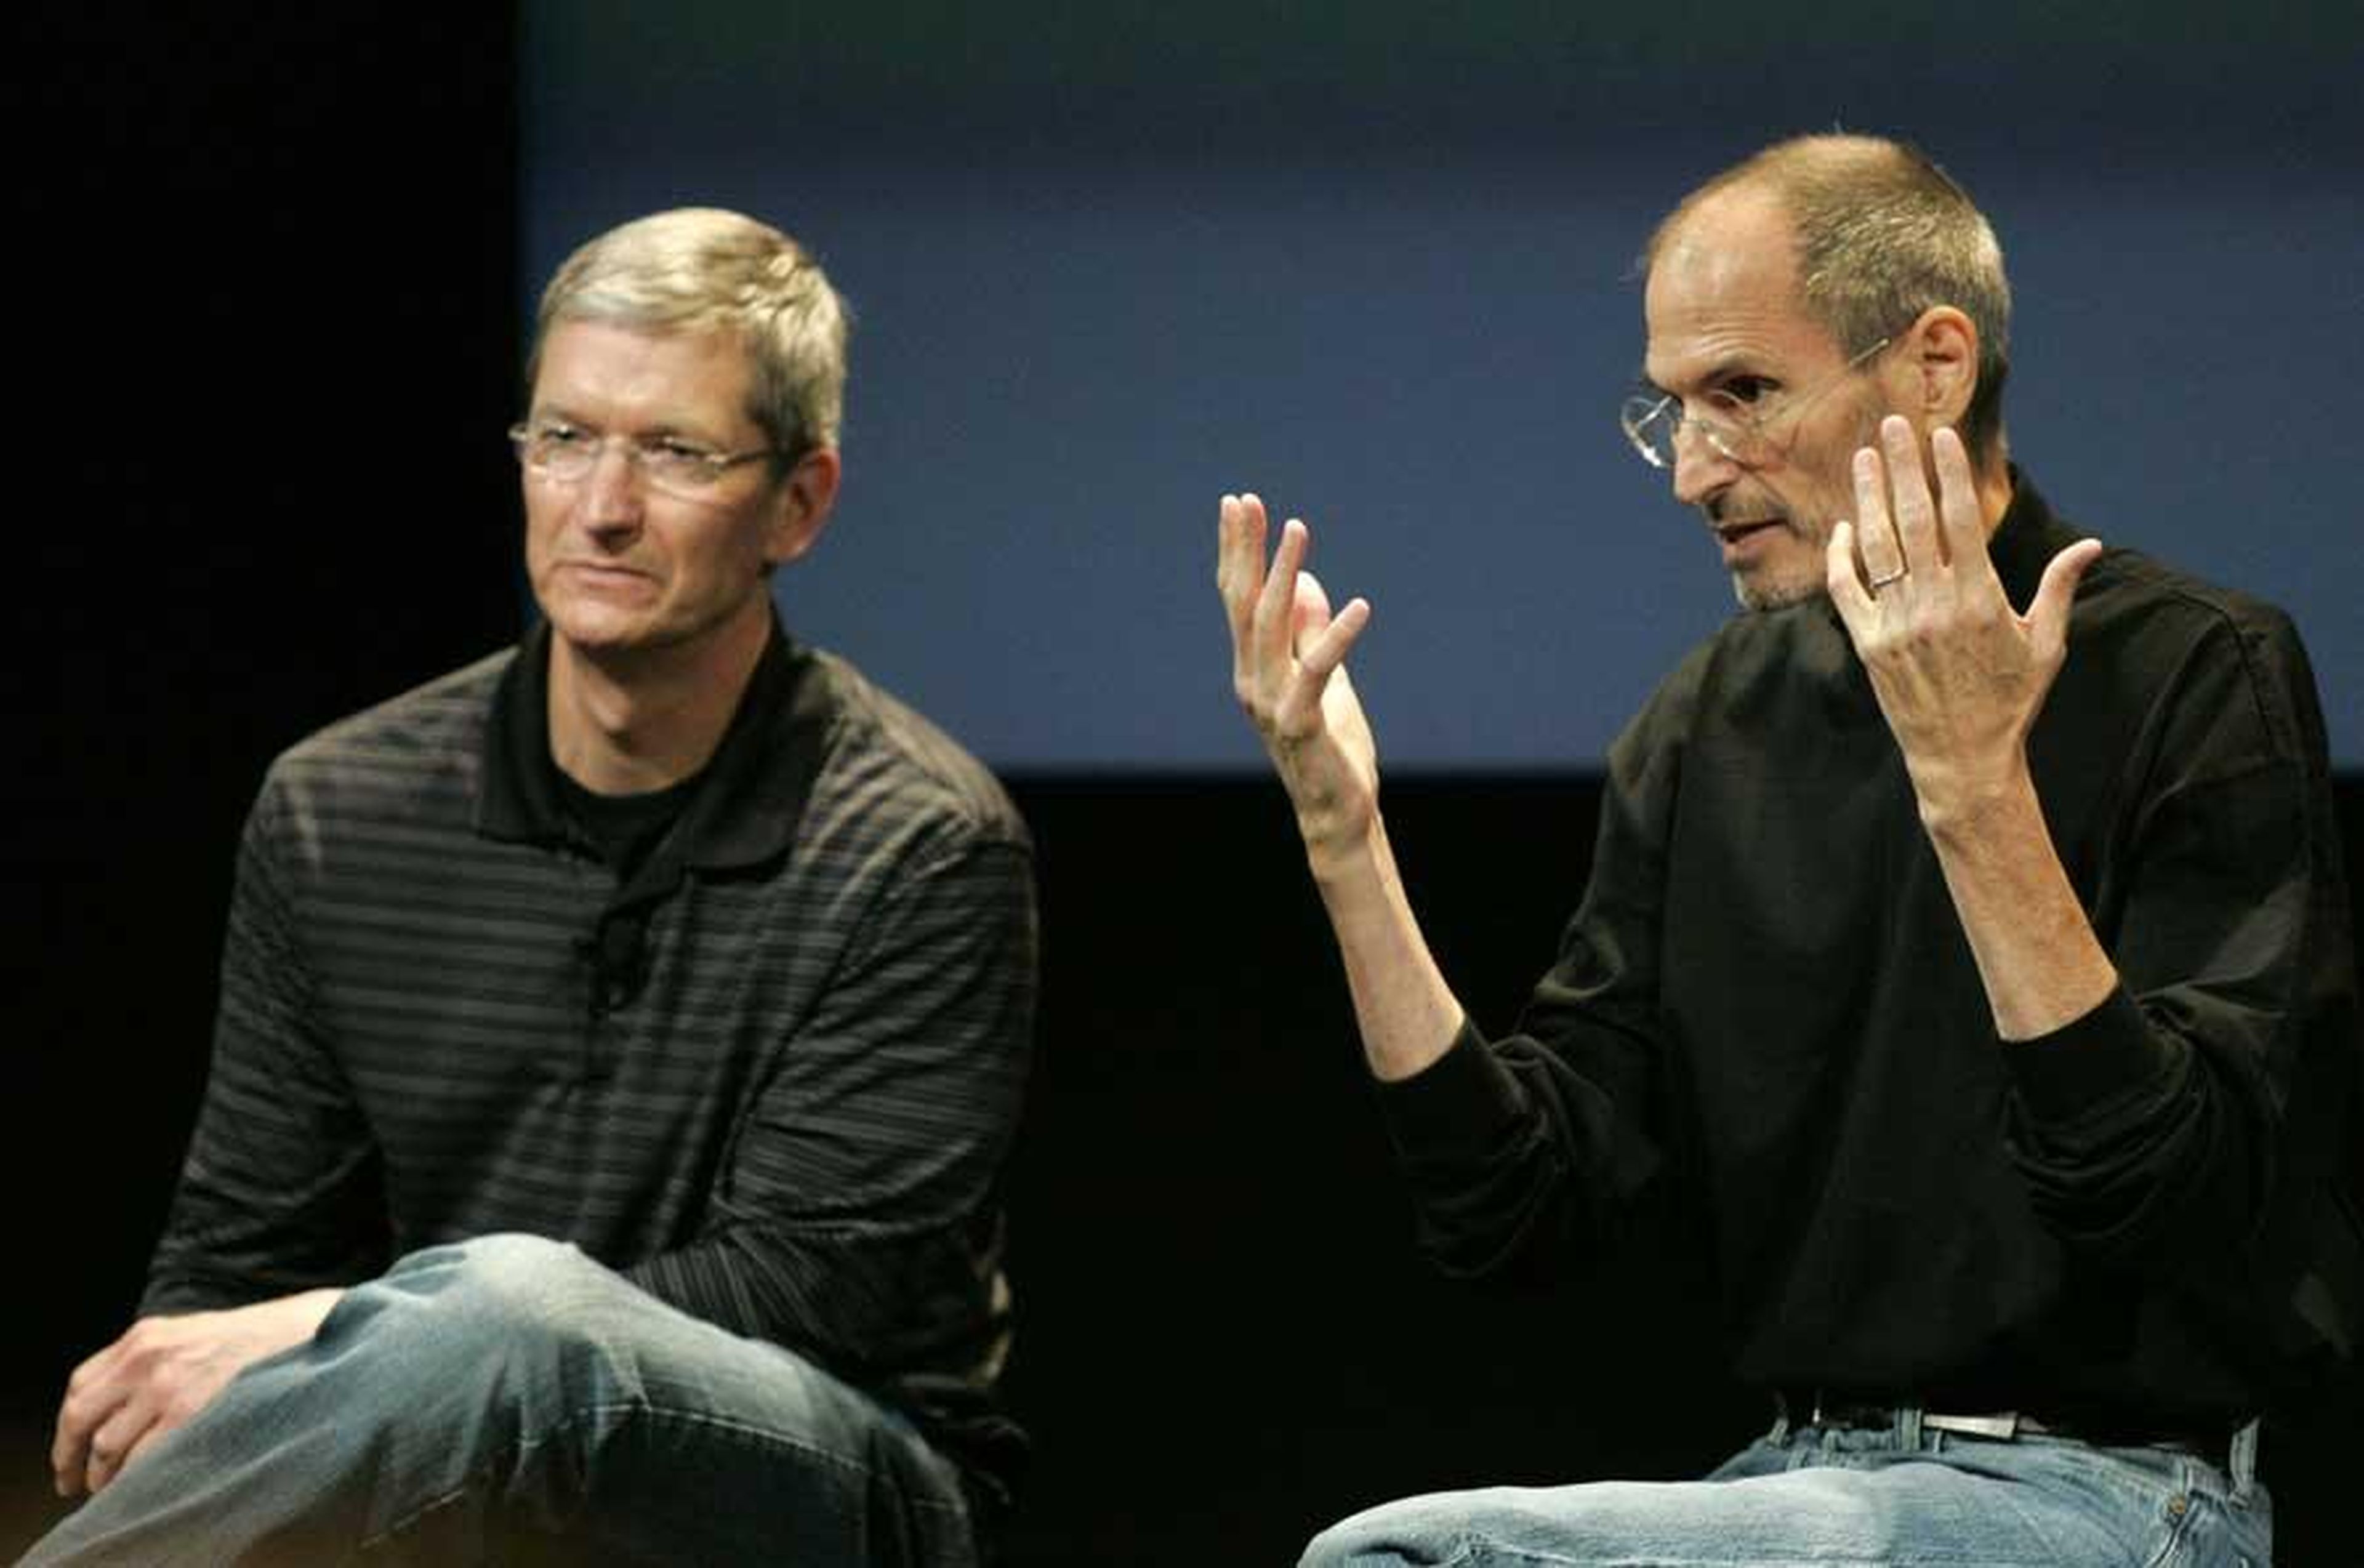 Cook and Jobs answer questions about the iPhone 4 in 2010.